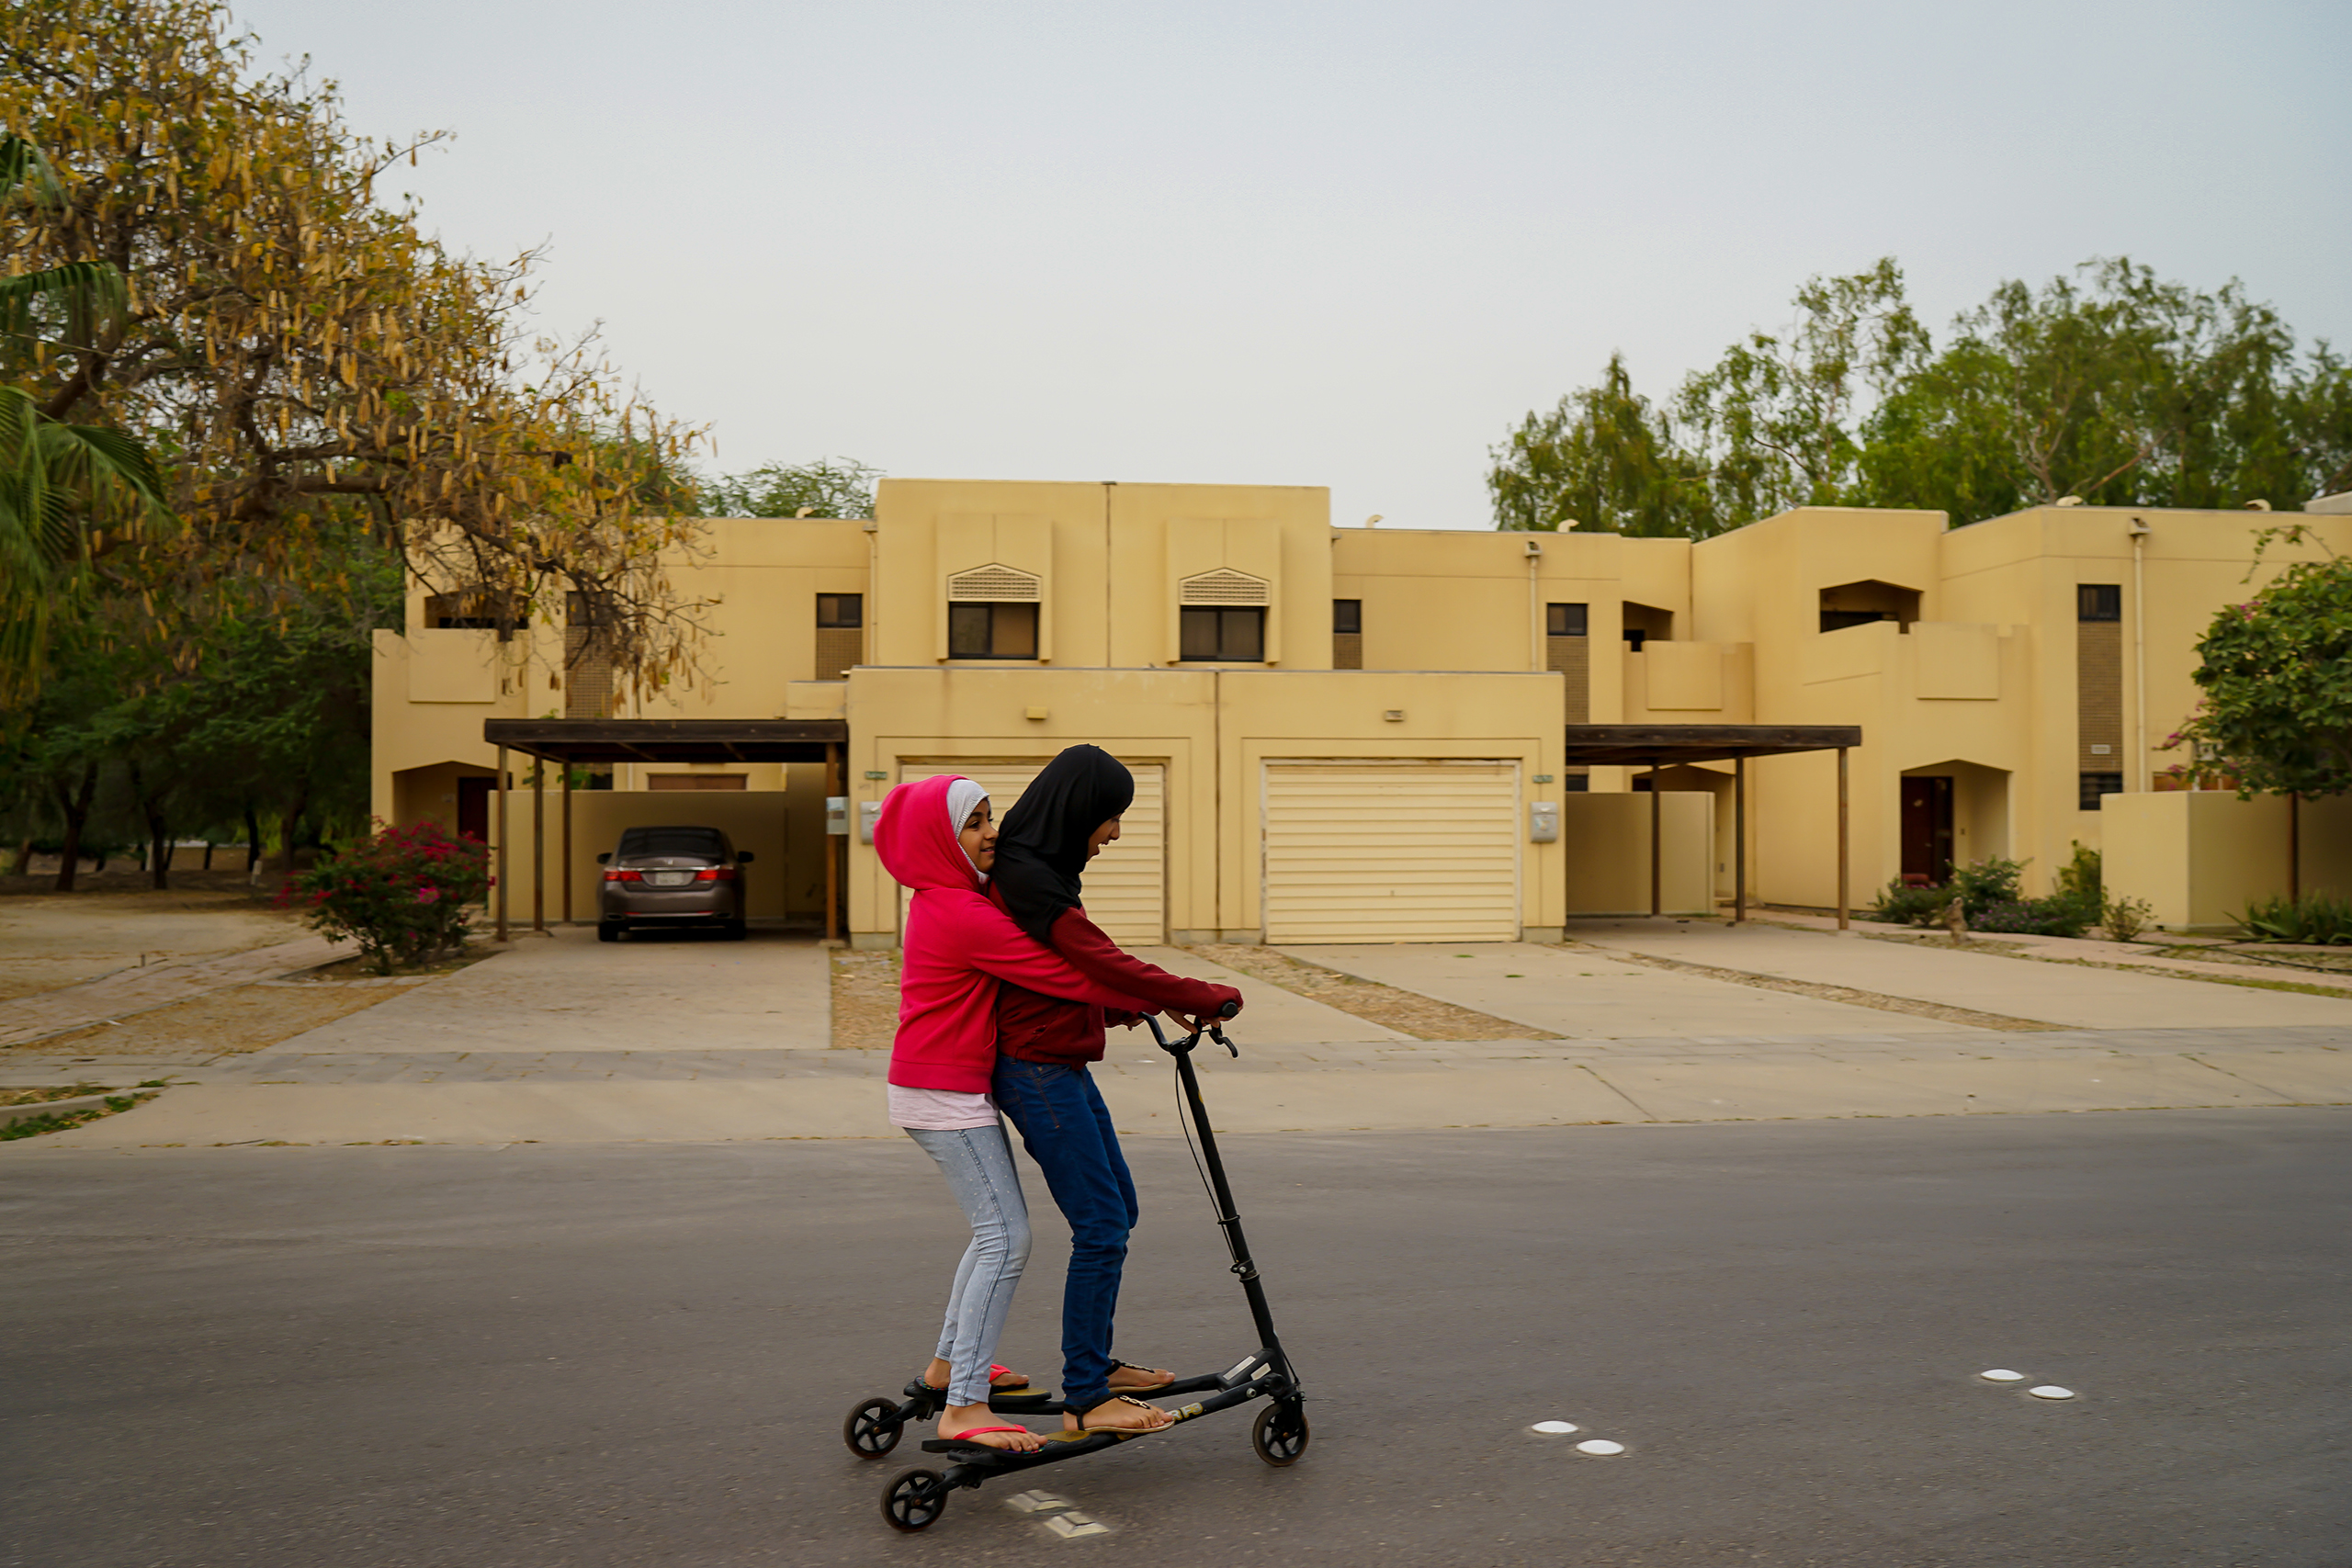 The photographer's daughters, Sura and Yara, ride a scooter around the block of their neighborhood in Jubail Industrial City, April 2016. As they appear young, Alsultan says, no one will harass them.